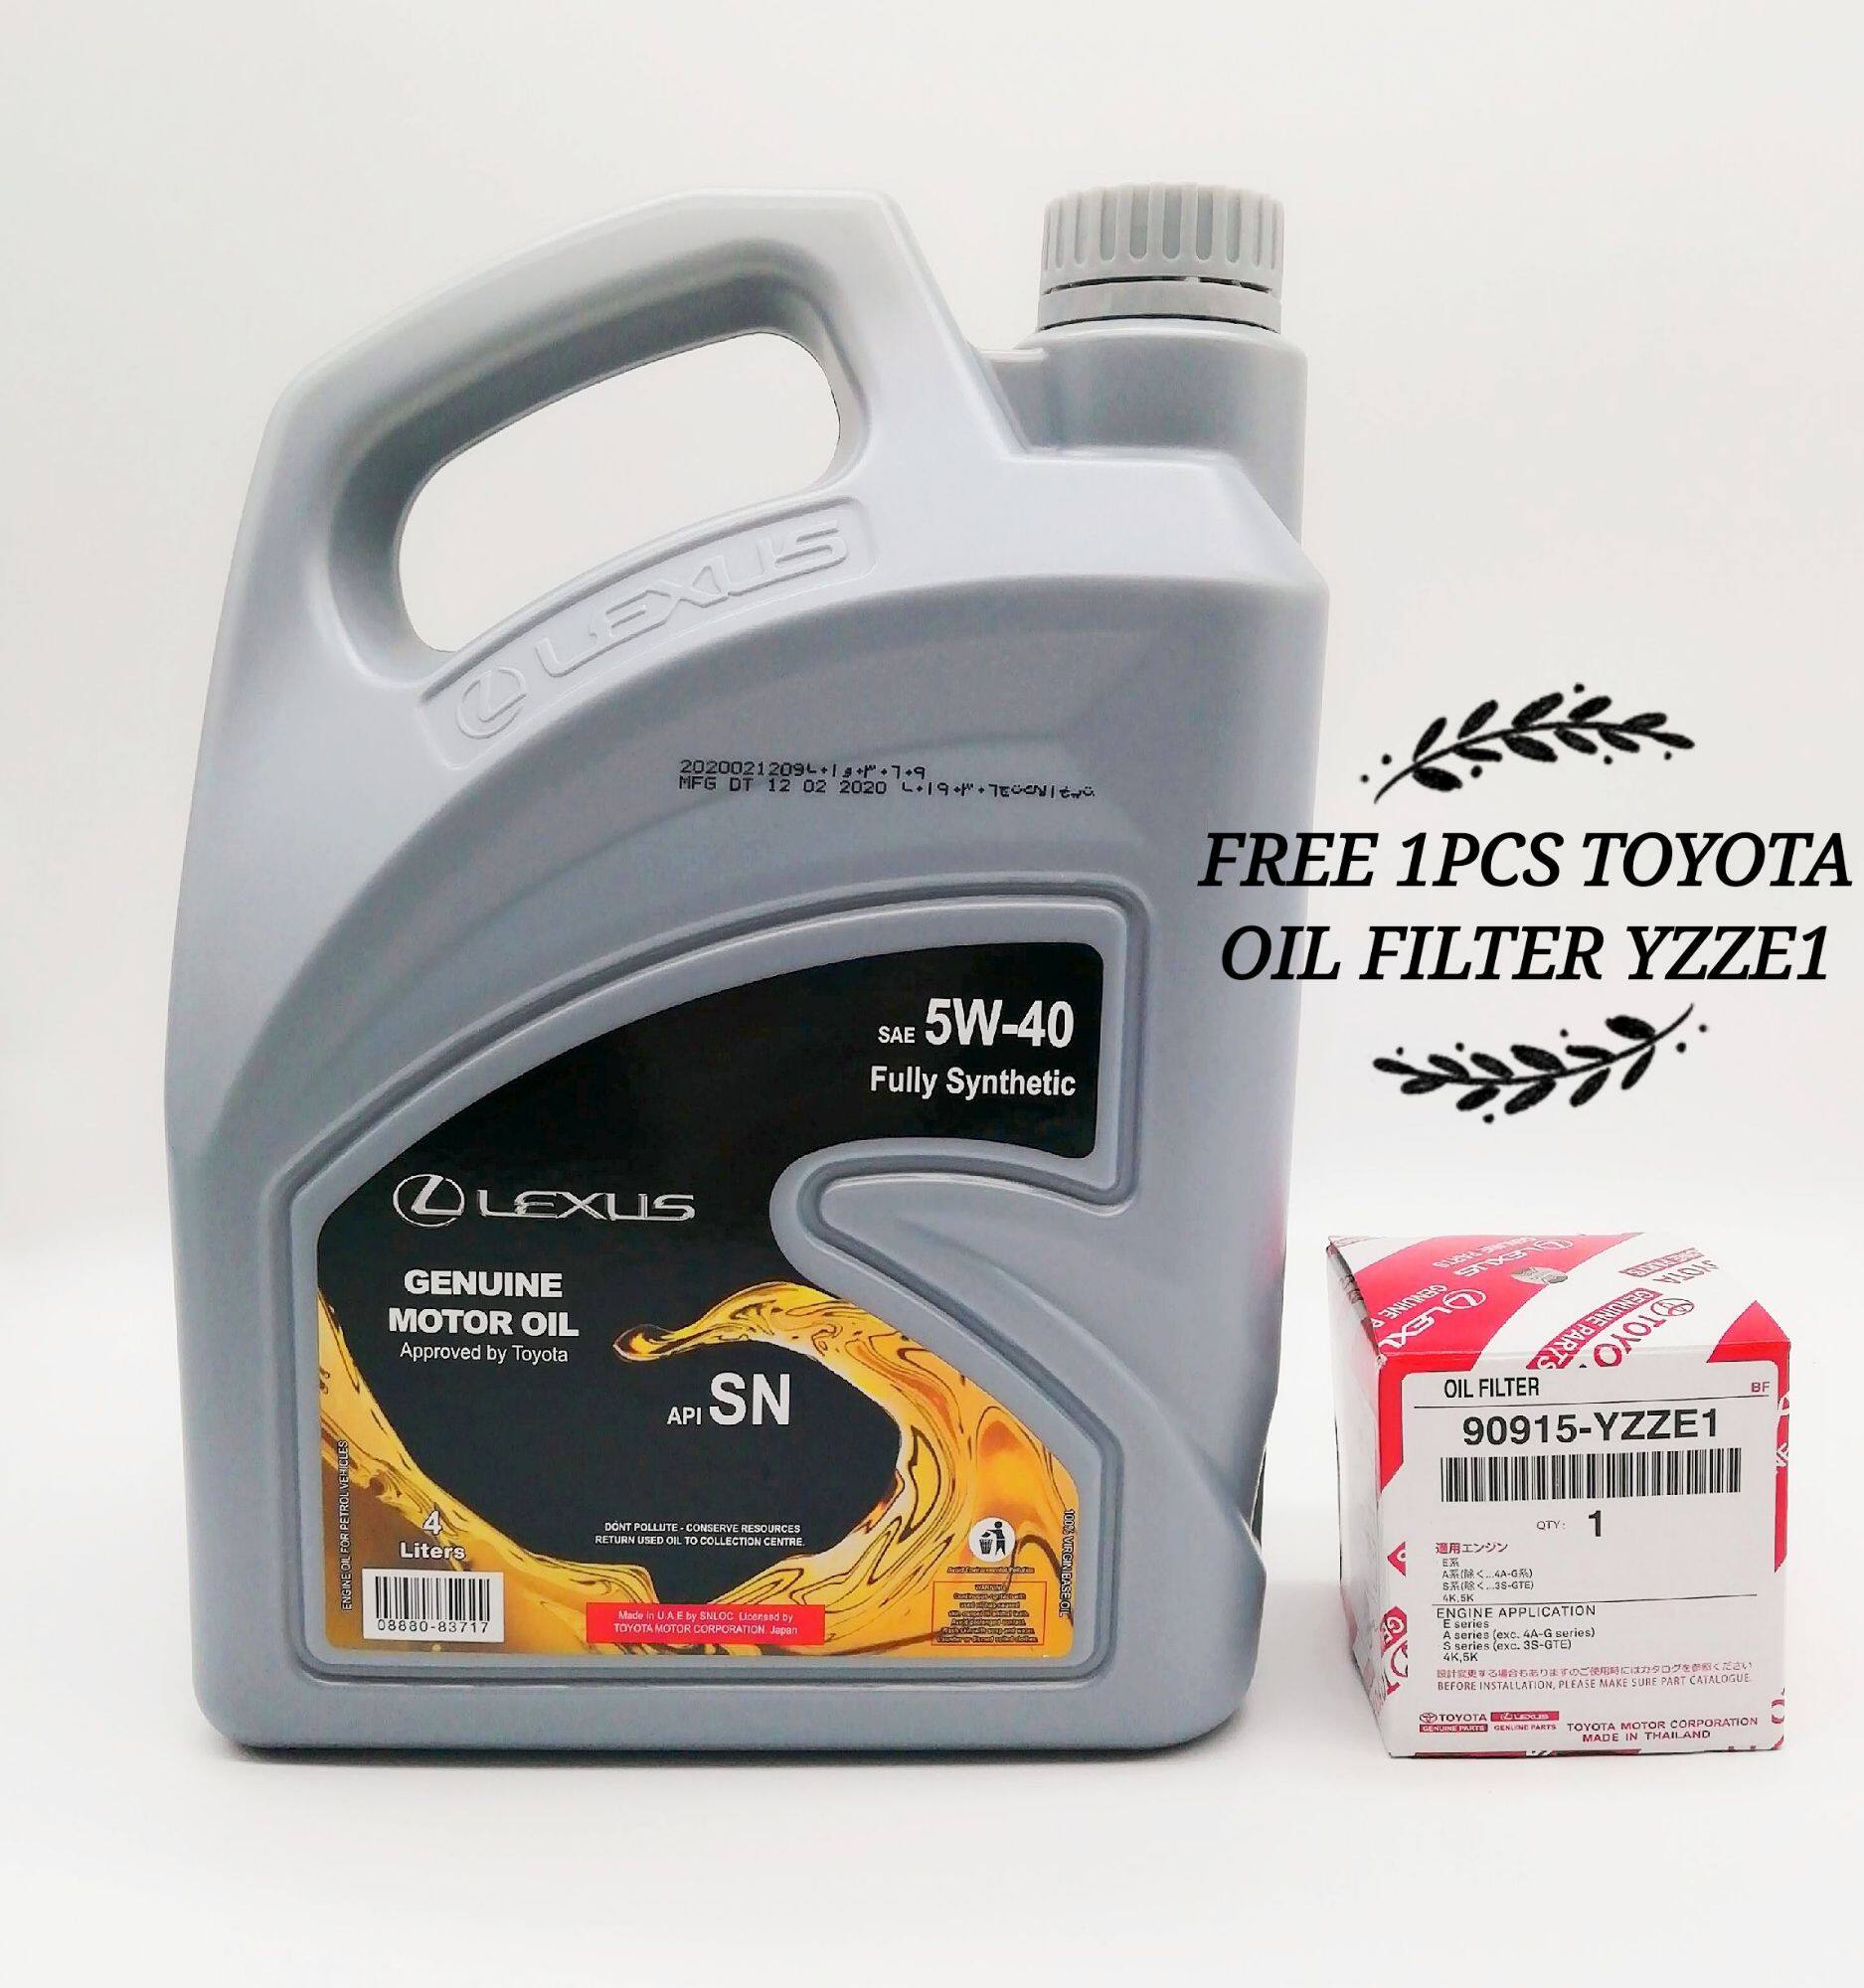 LEXUS FULLY SYNTHETIC 5W40 ENGINE OIL With Toyota Oil Filter YZZE1